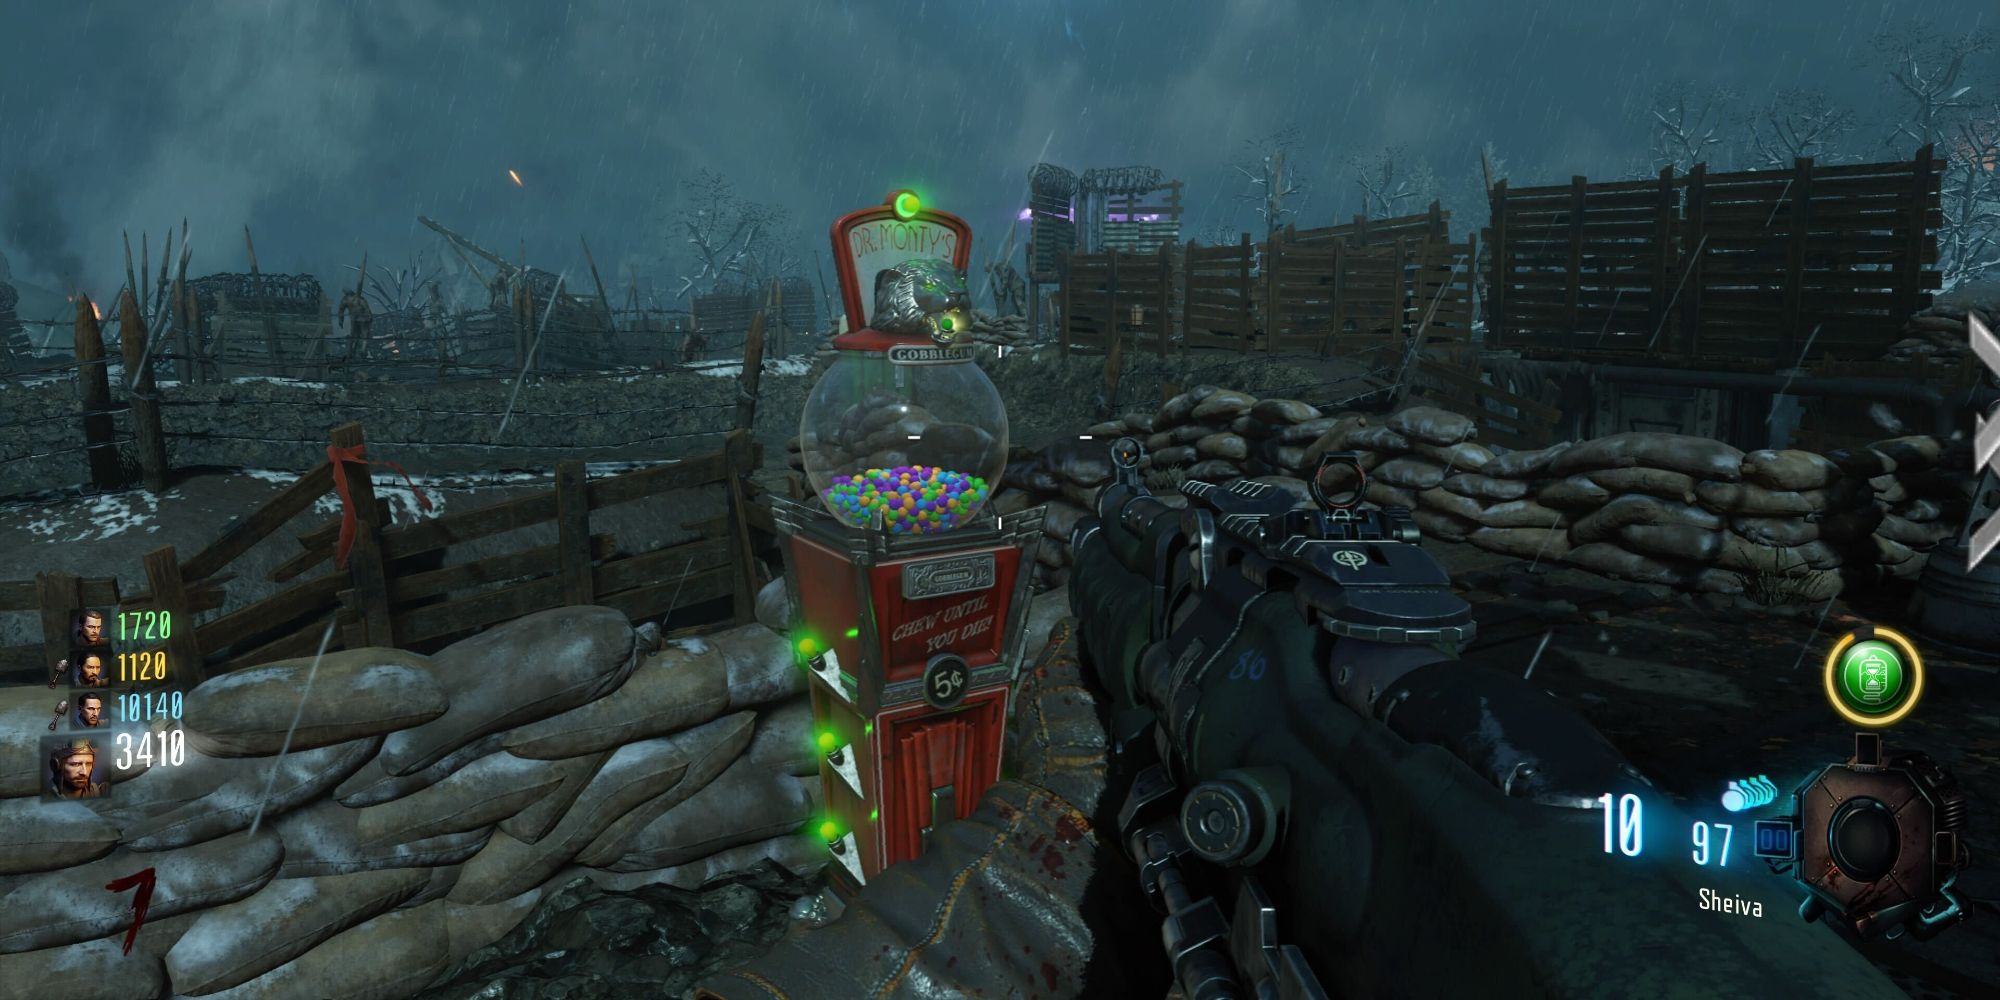 Gameplay from Call Of Duty: Black Ops 3 Zombie mode, showing a Gobblegum dispenser